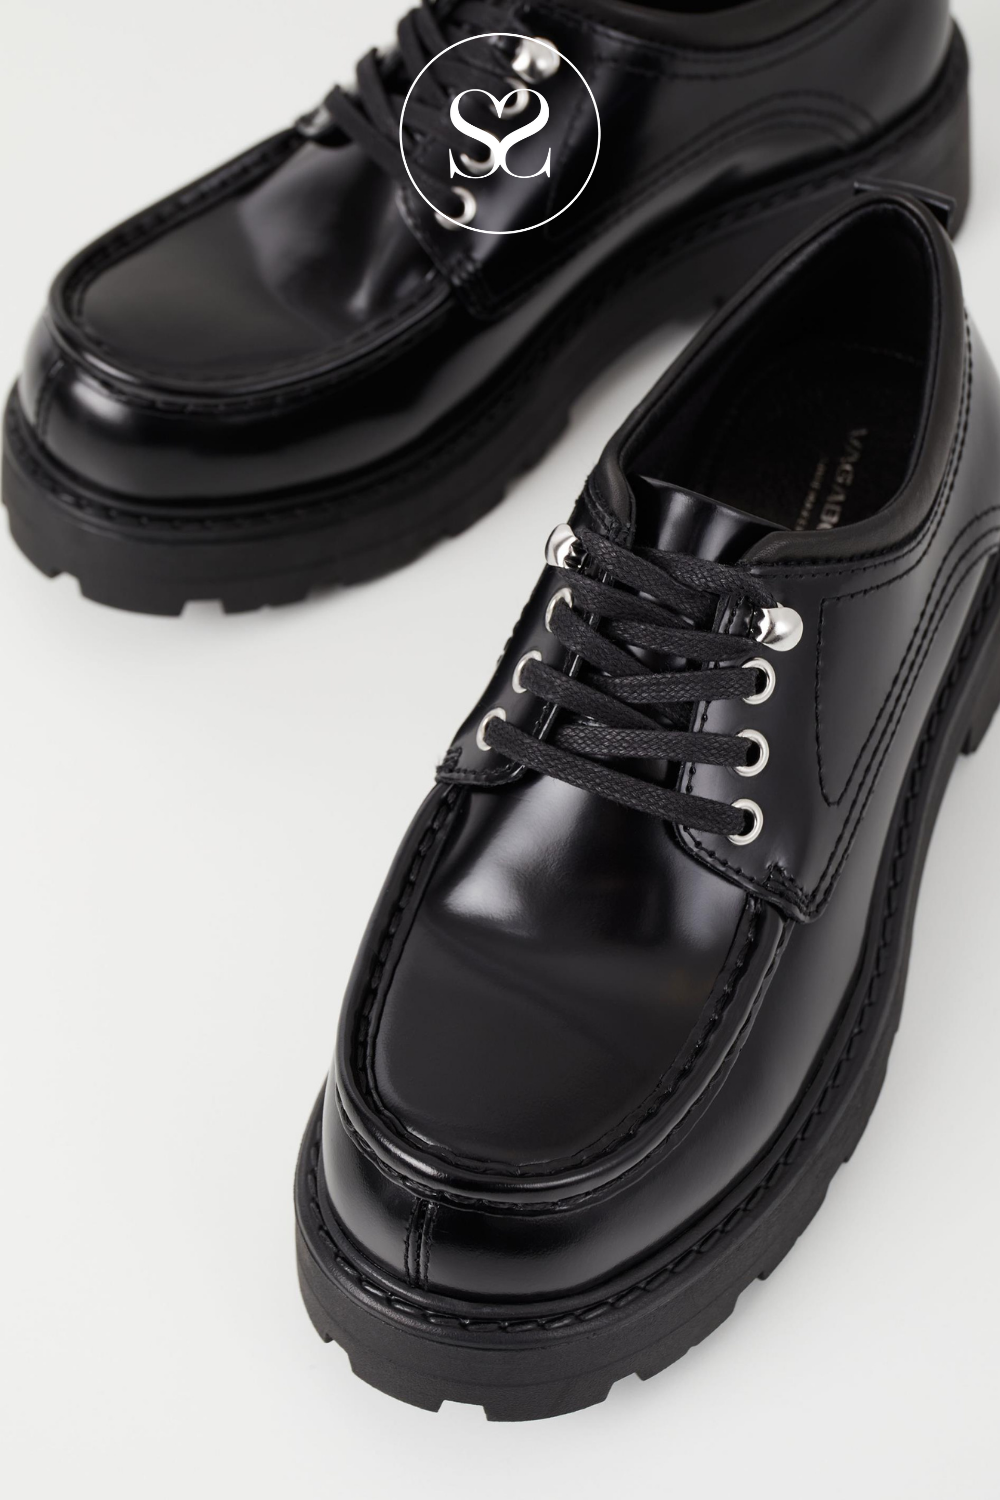 VAGABOND COSMO BLACK LEATHER BROGUES WITH LACES, SILVER EYELETS AND A CHUNKY SOLE. CHIC AND COOL STYLE FOR AUTUMN WINTER.